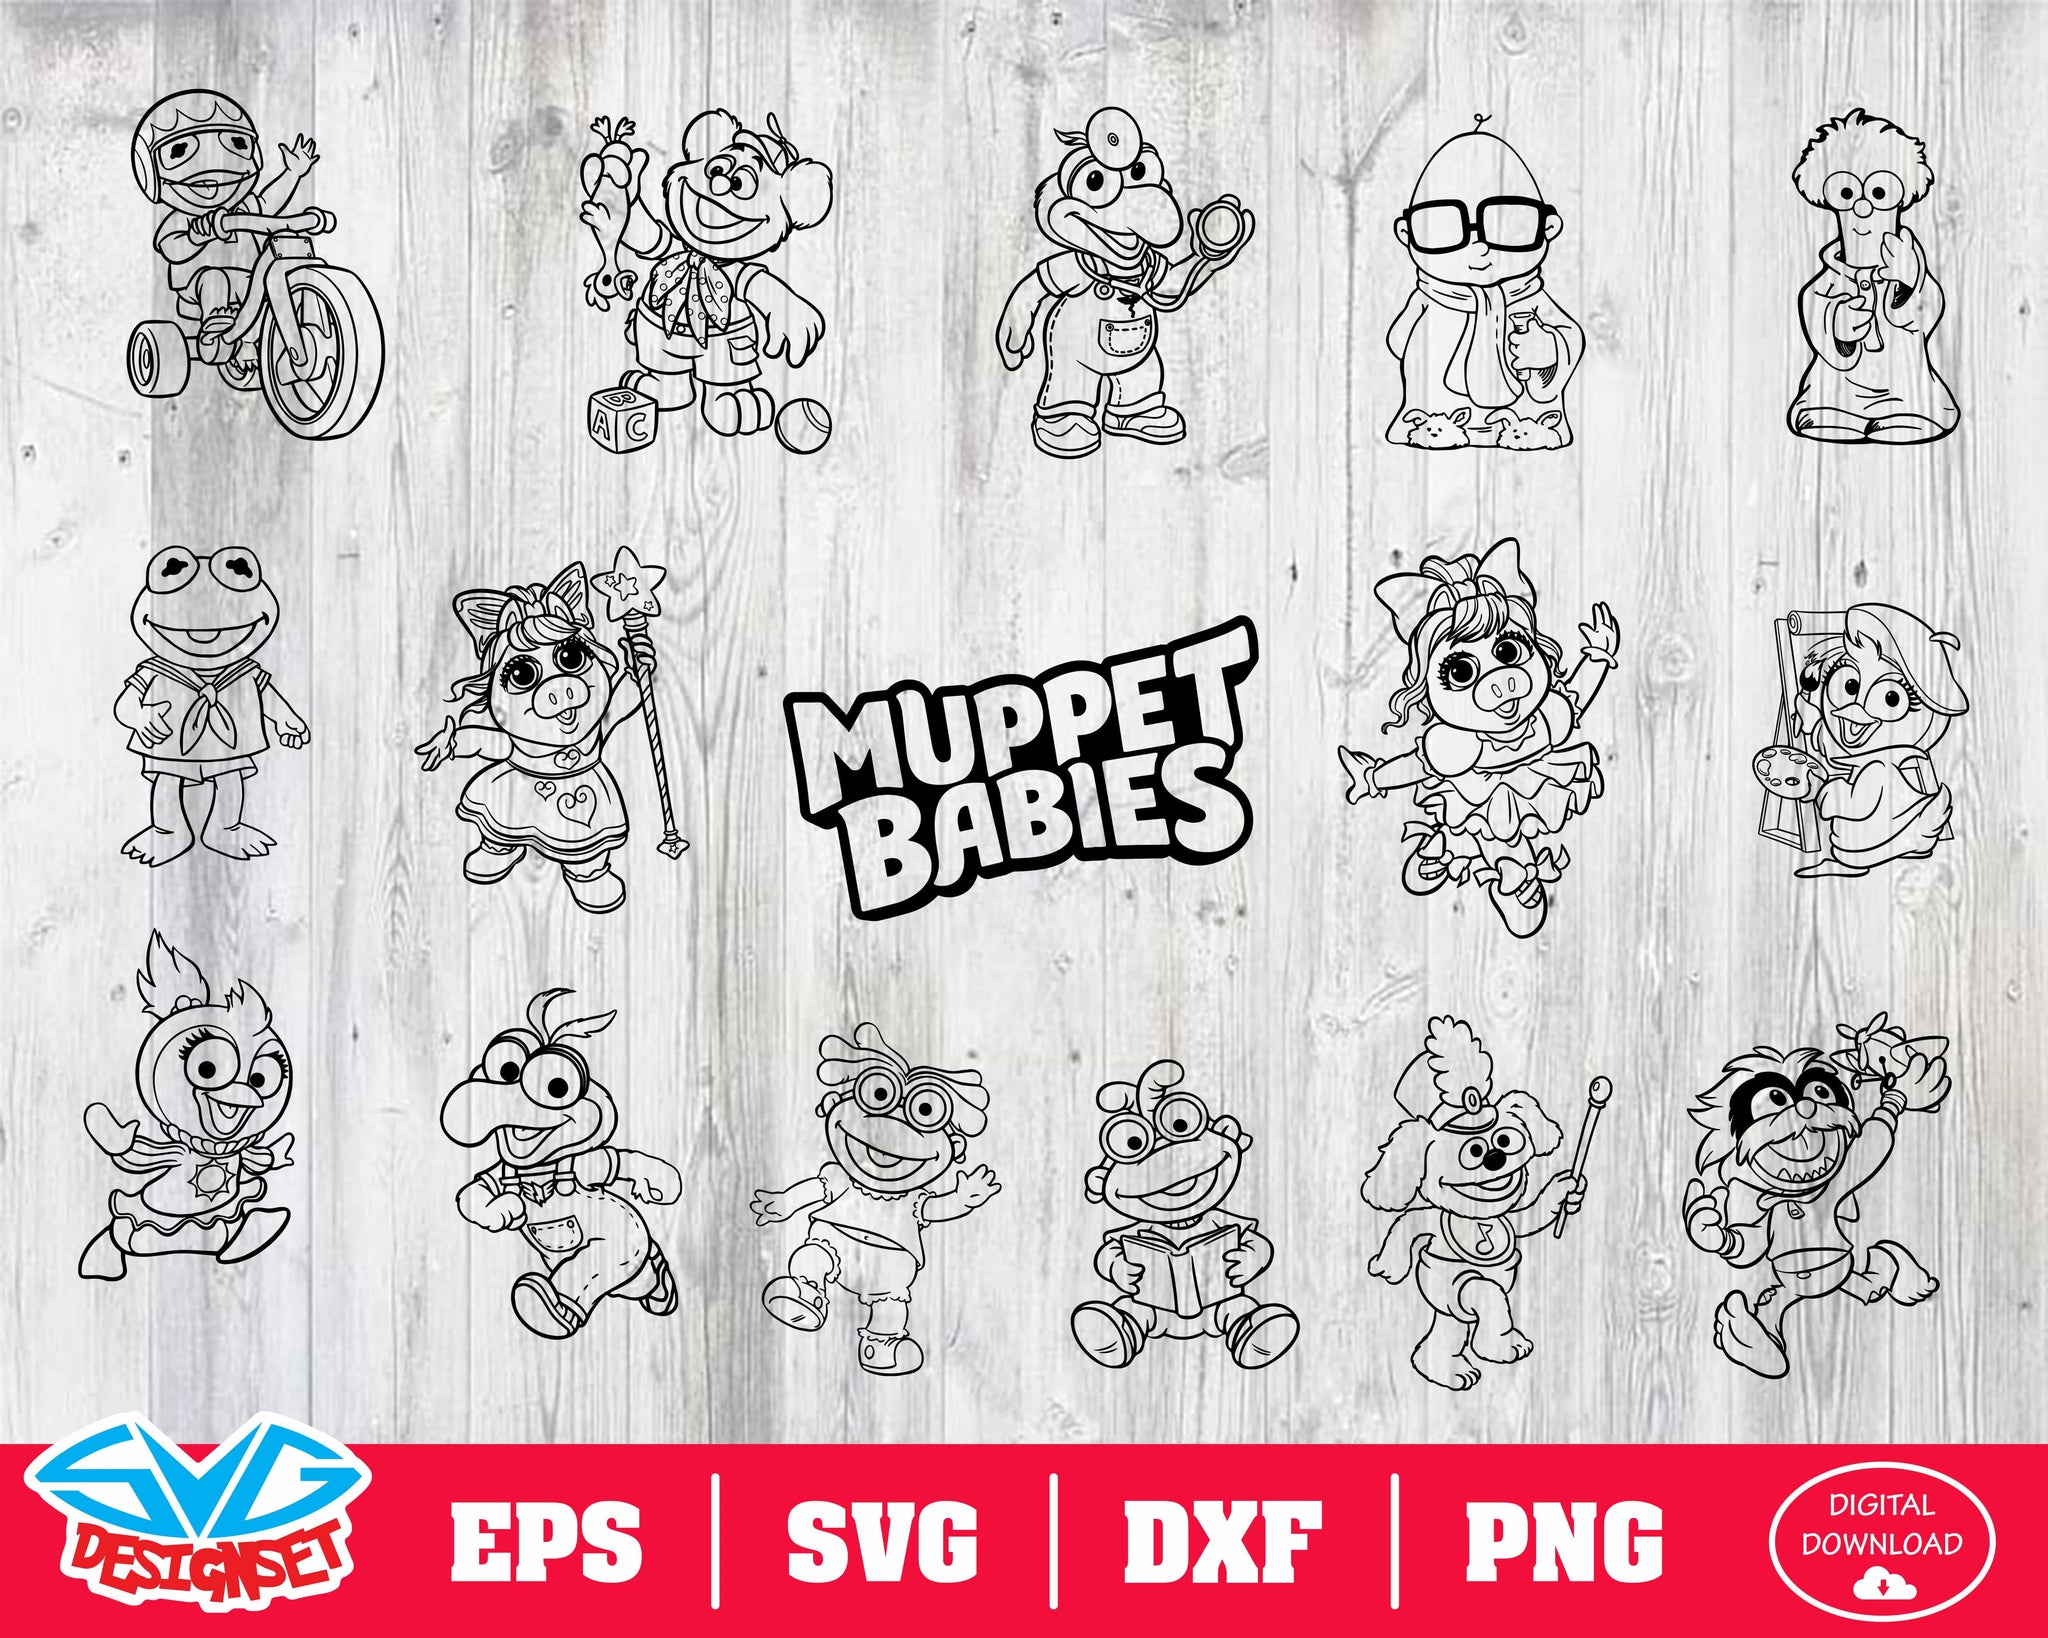 Muppeys babies Svg, Dxf, Eps, Png, Clipart, Silhouette and Cutfiles #3 - SVGDesignSets